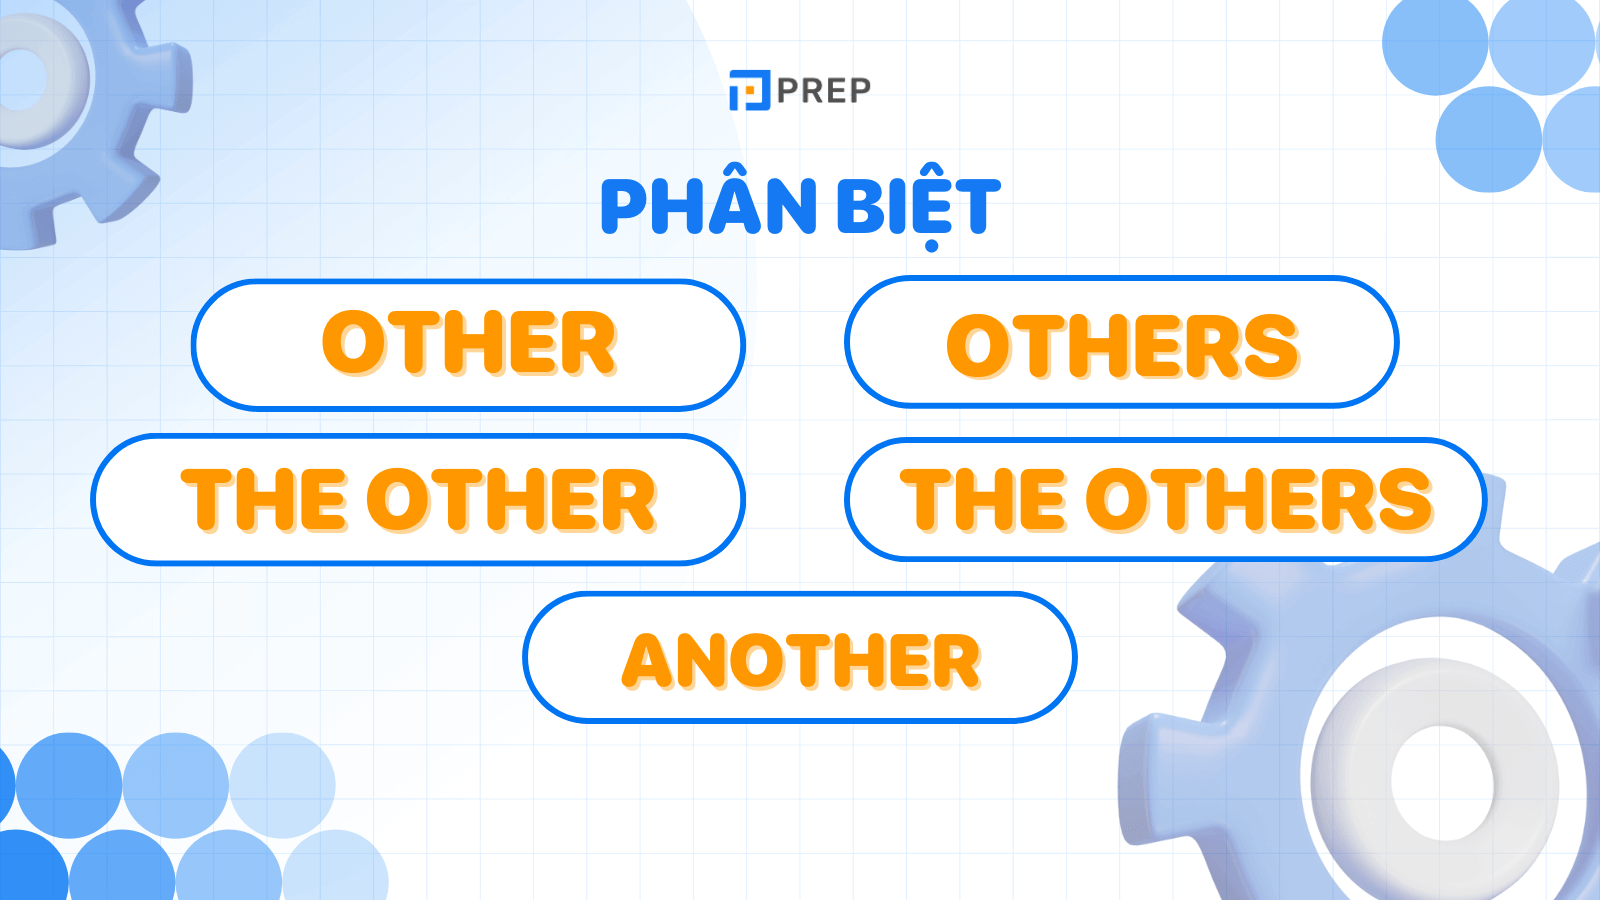 Phân biệt Other và Others, The other và The others, Another